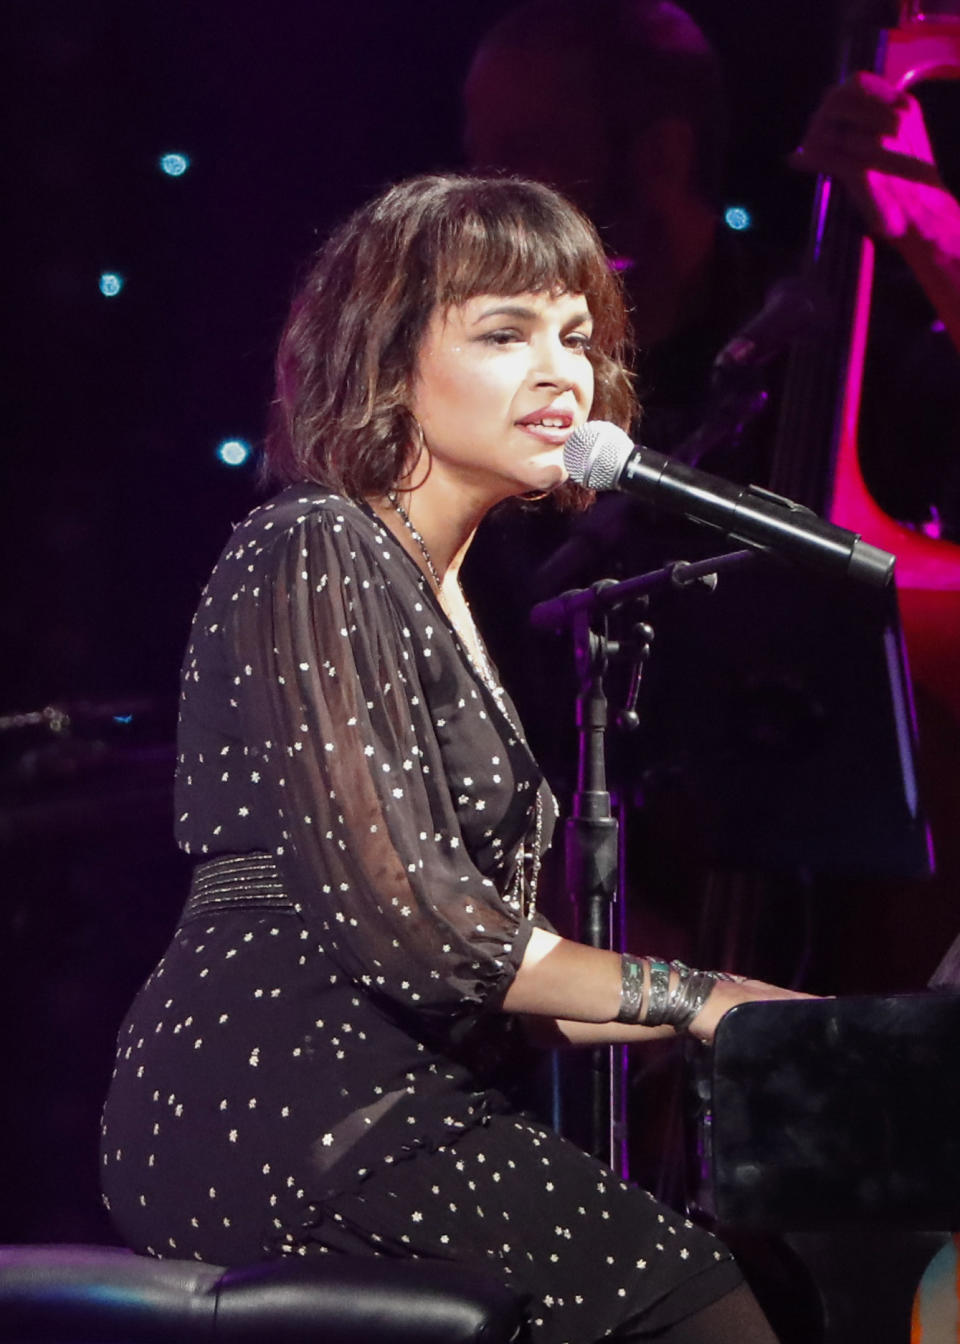 FILE - Norah Jones performs at "Willie: Life & Songs Of An American Outlaw" on Jan. 12, 2019, in Nashville, Tenn. The soundtrack to the popular holiday special “A Charlie Brown Christmas” has sold more than five million copies. Jones included her version of the song “Christmas Time is Here" on a holiday album "I Dream of Christmas" released last year. (Photo by Al Wagner/Invision/AP, File)